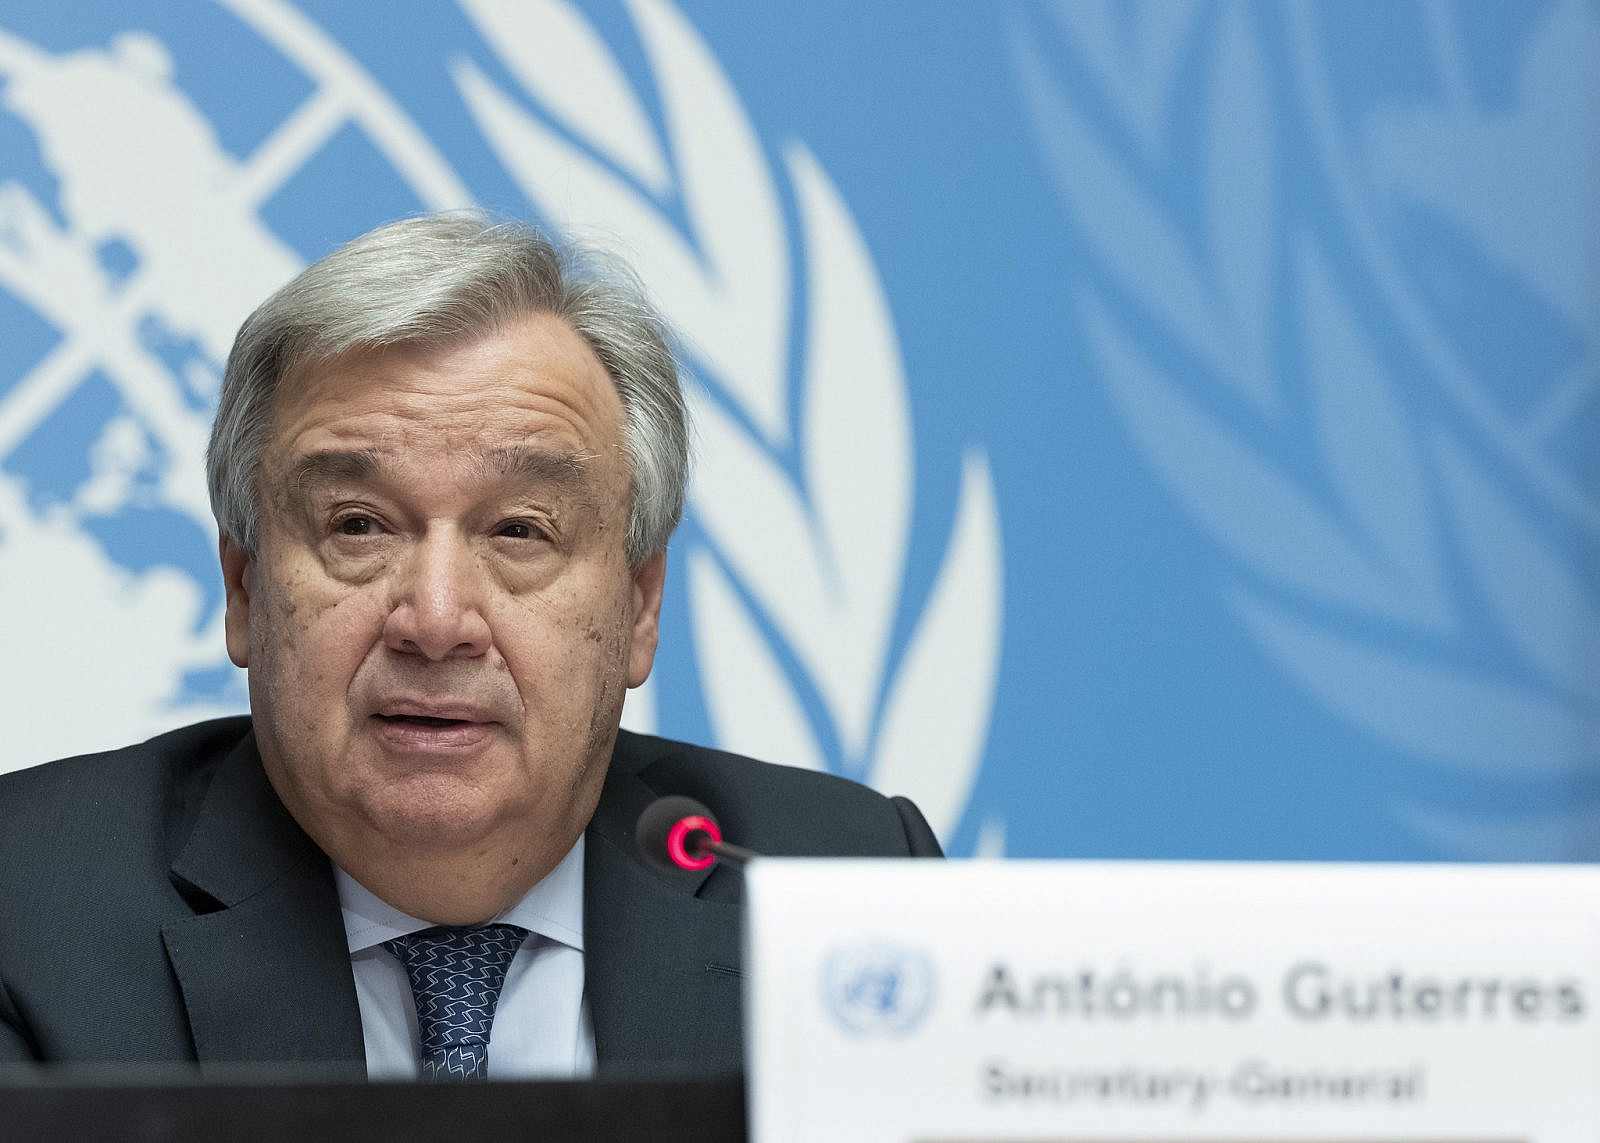 Secretary-General António Guterres during press conference on the theme on violence against women in conflict. 25 February 2019. (UN Photo/Jean Marc Ferré)